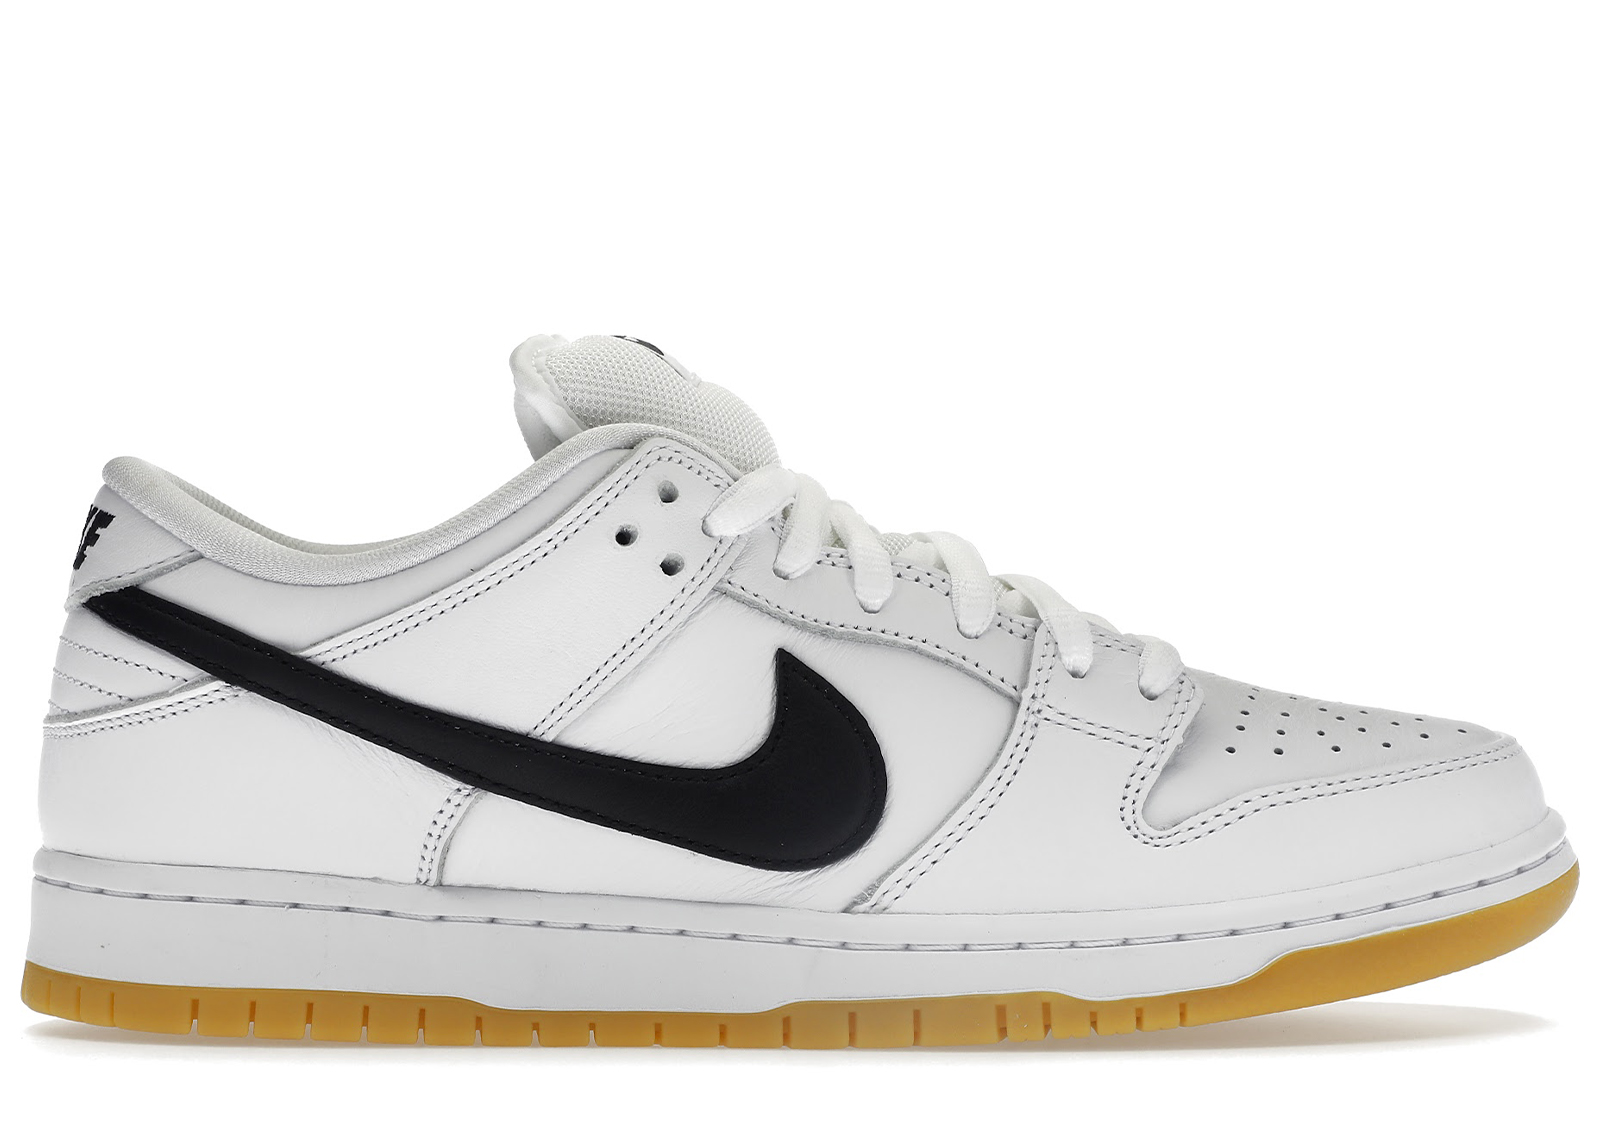 NIKESB DUNKlowpro White | eclipseseal.com